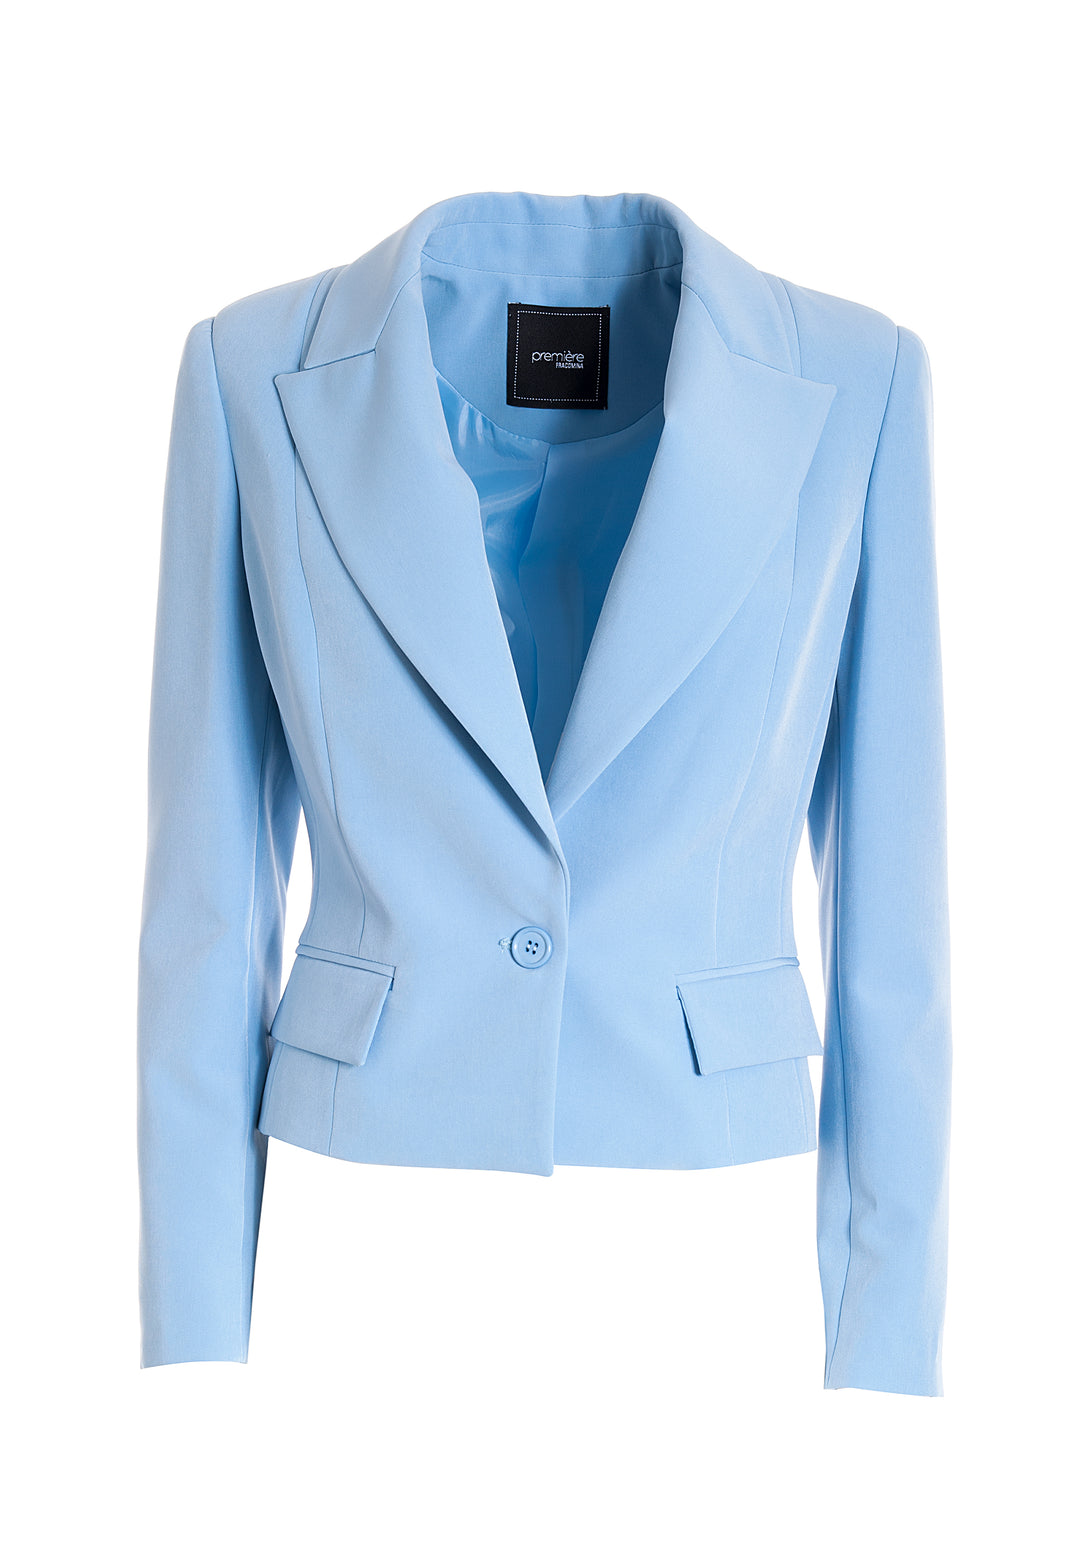 Blazer jacket slim fit made in technical fabric